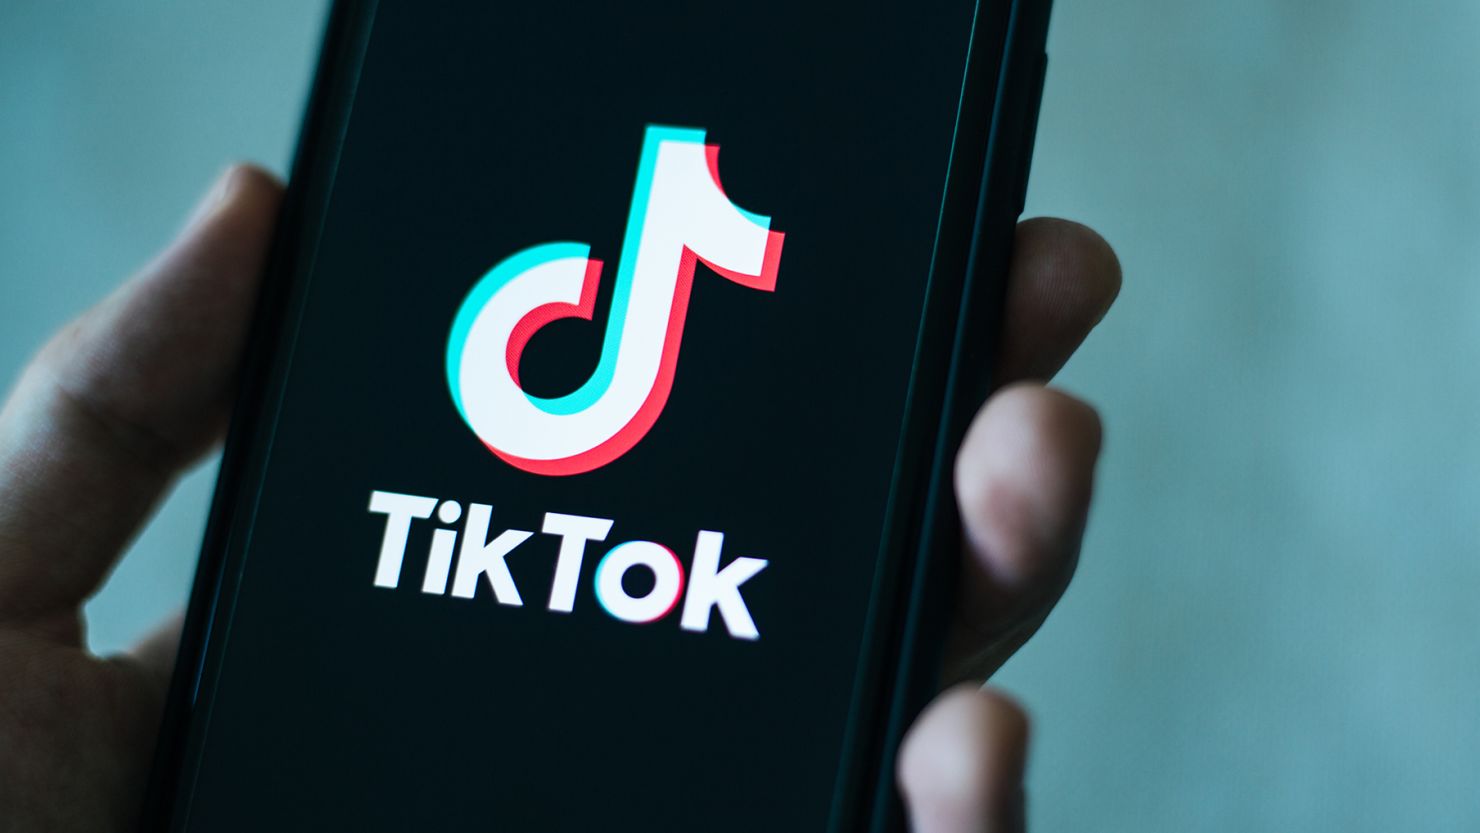 Agencies have 30 days to ban TikTok on federal devices, White